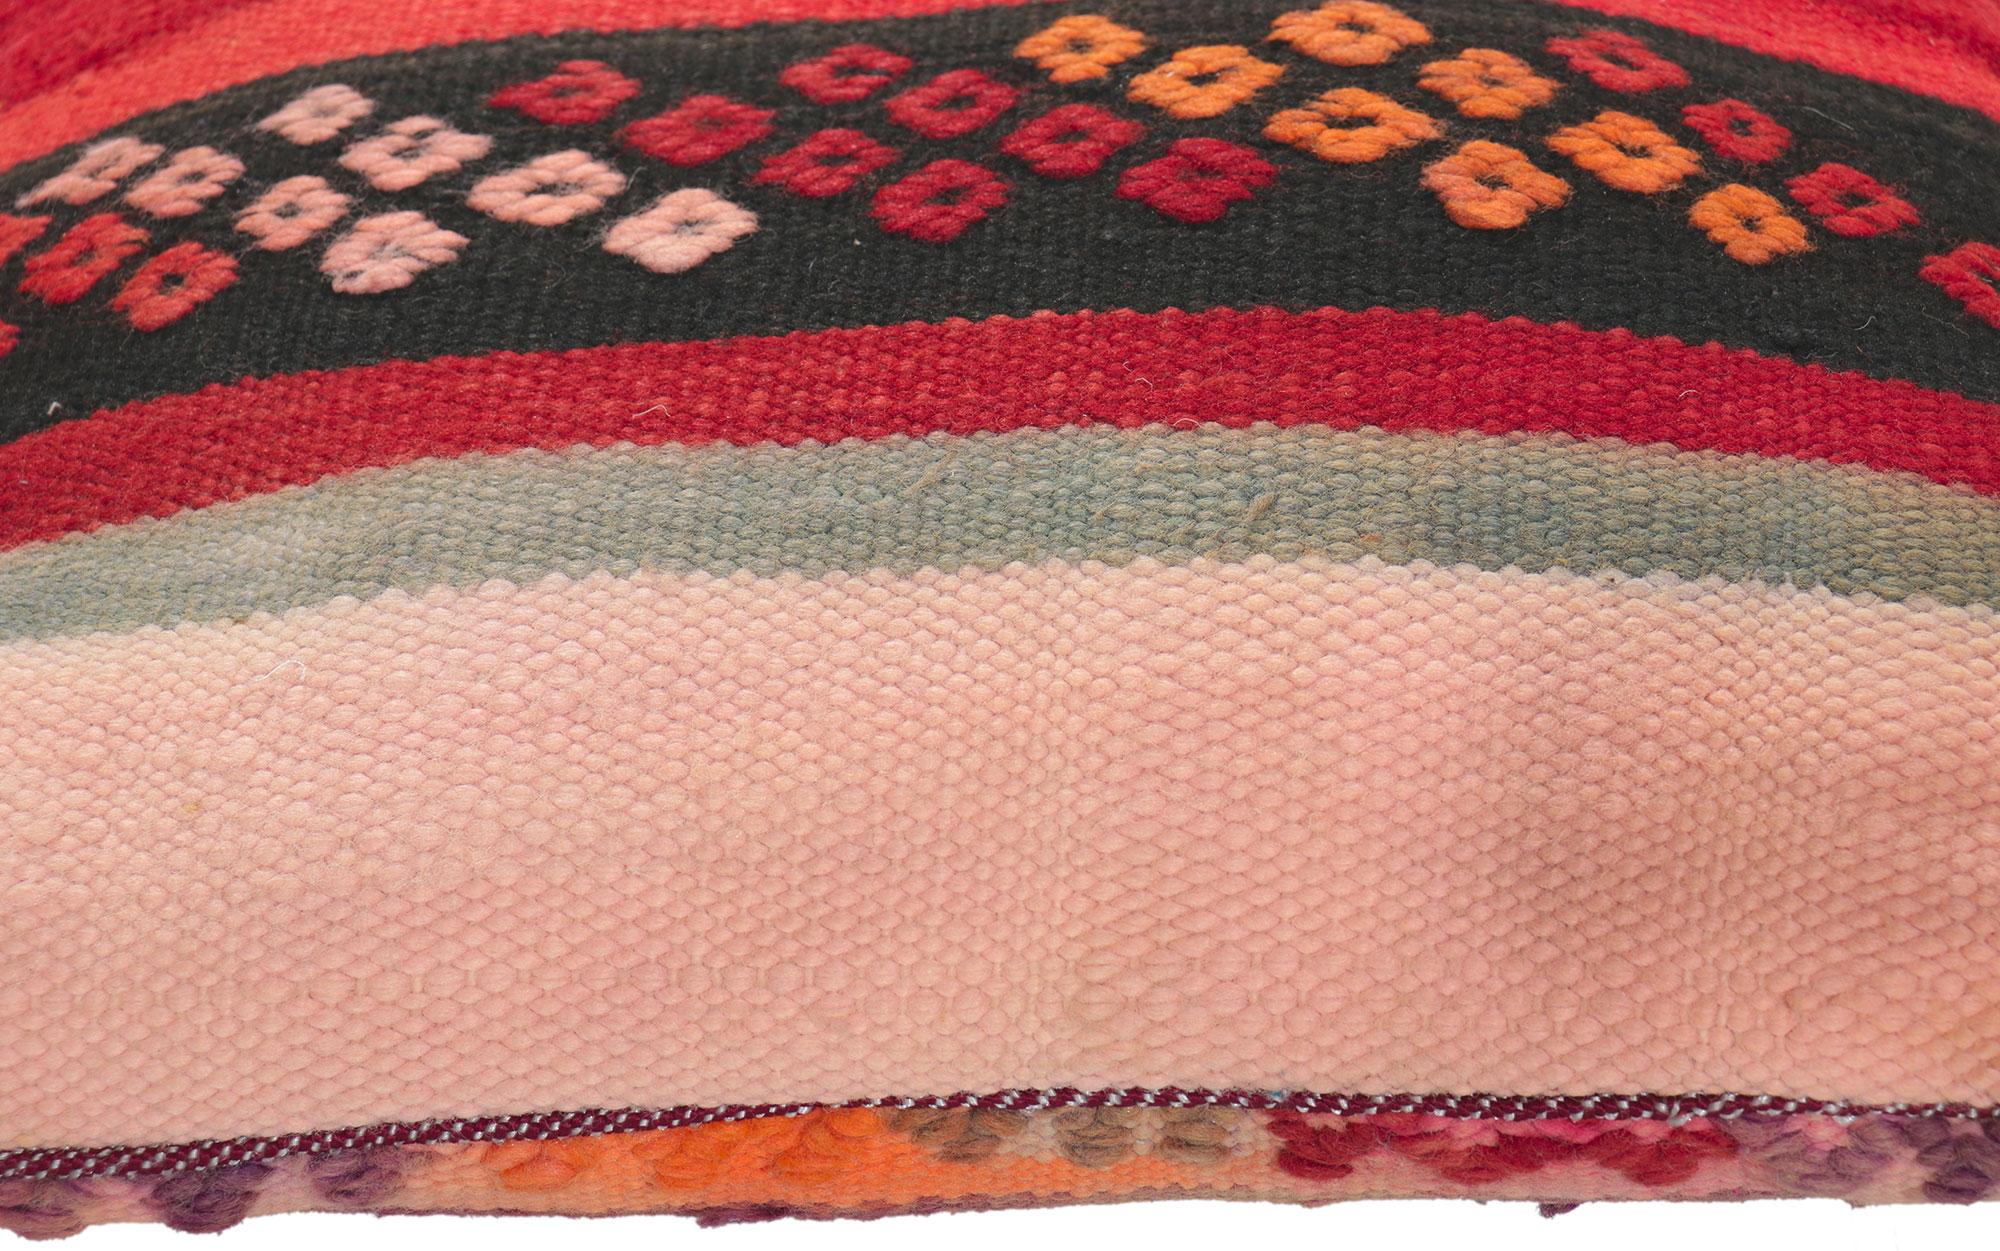 Hand-Woven Vintage Moroccan Rug Pillow by Berber Tribes of Morocco For Sale